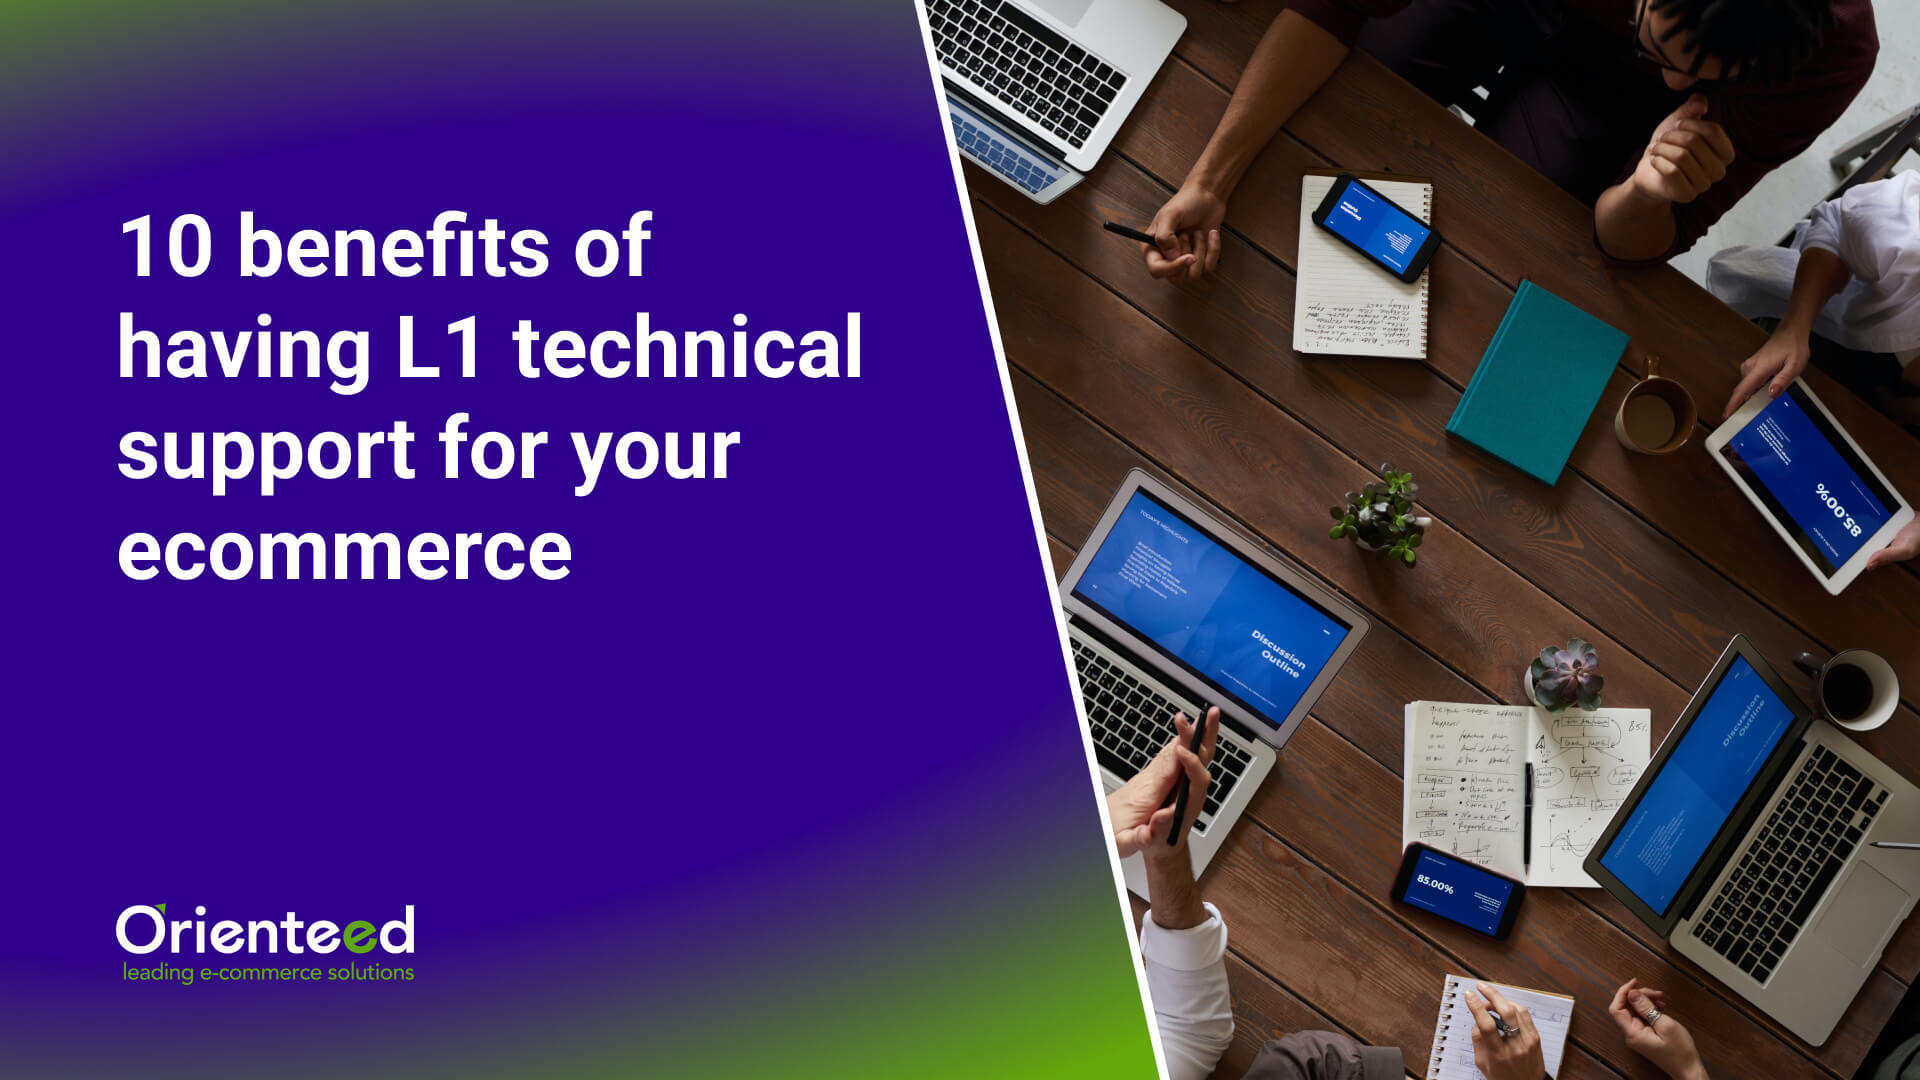 10 benefits of having L1 technical support for your ecommerce